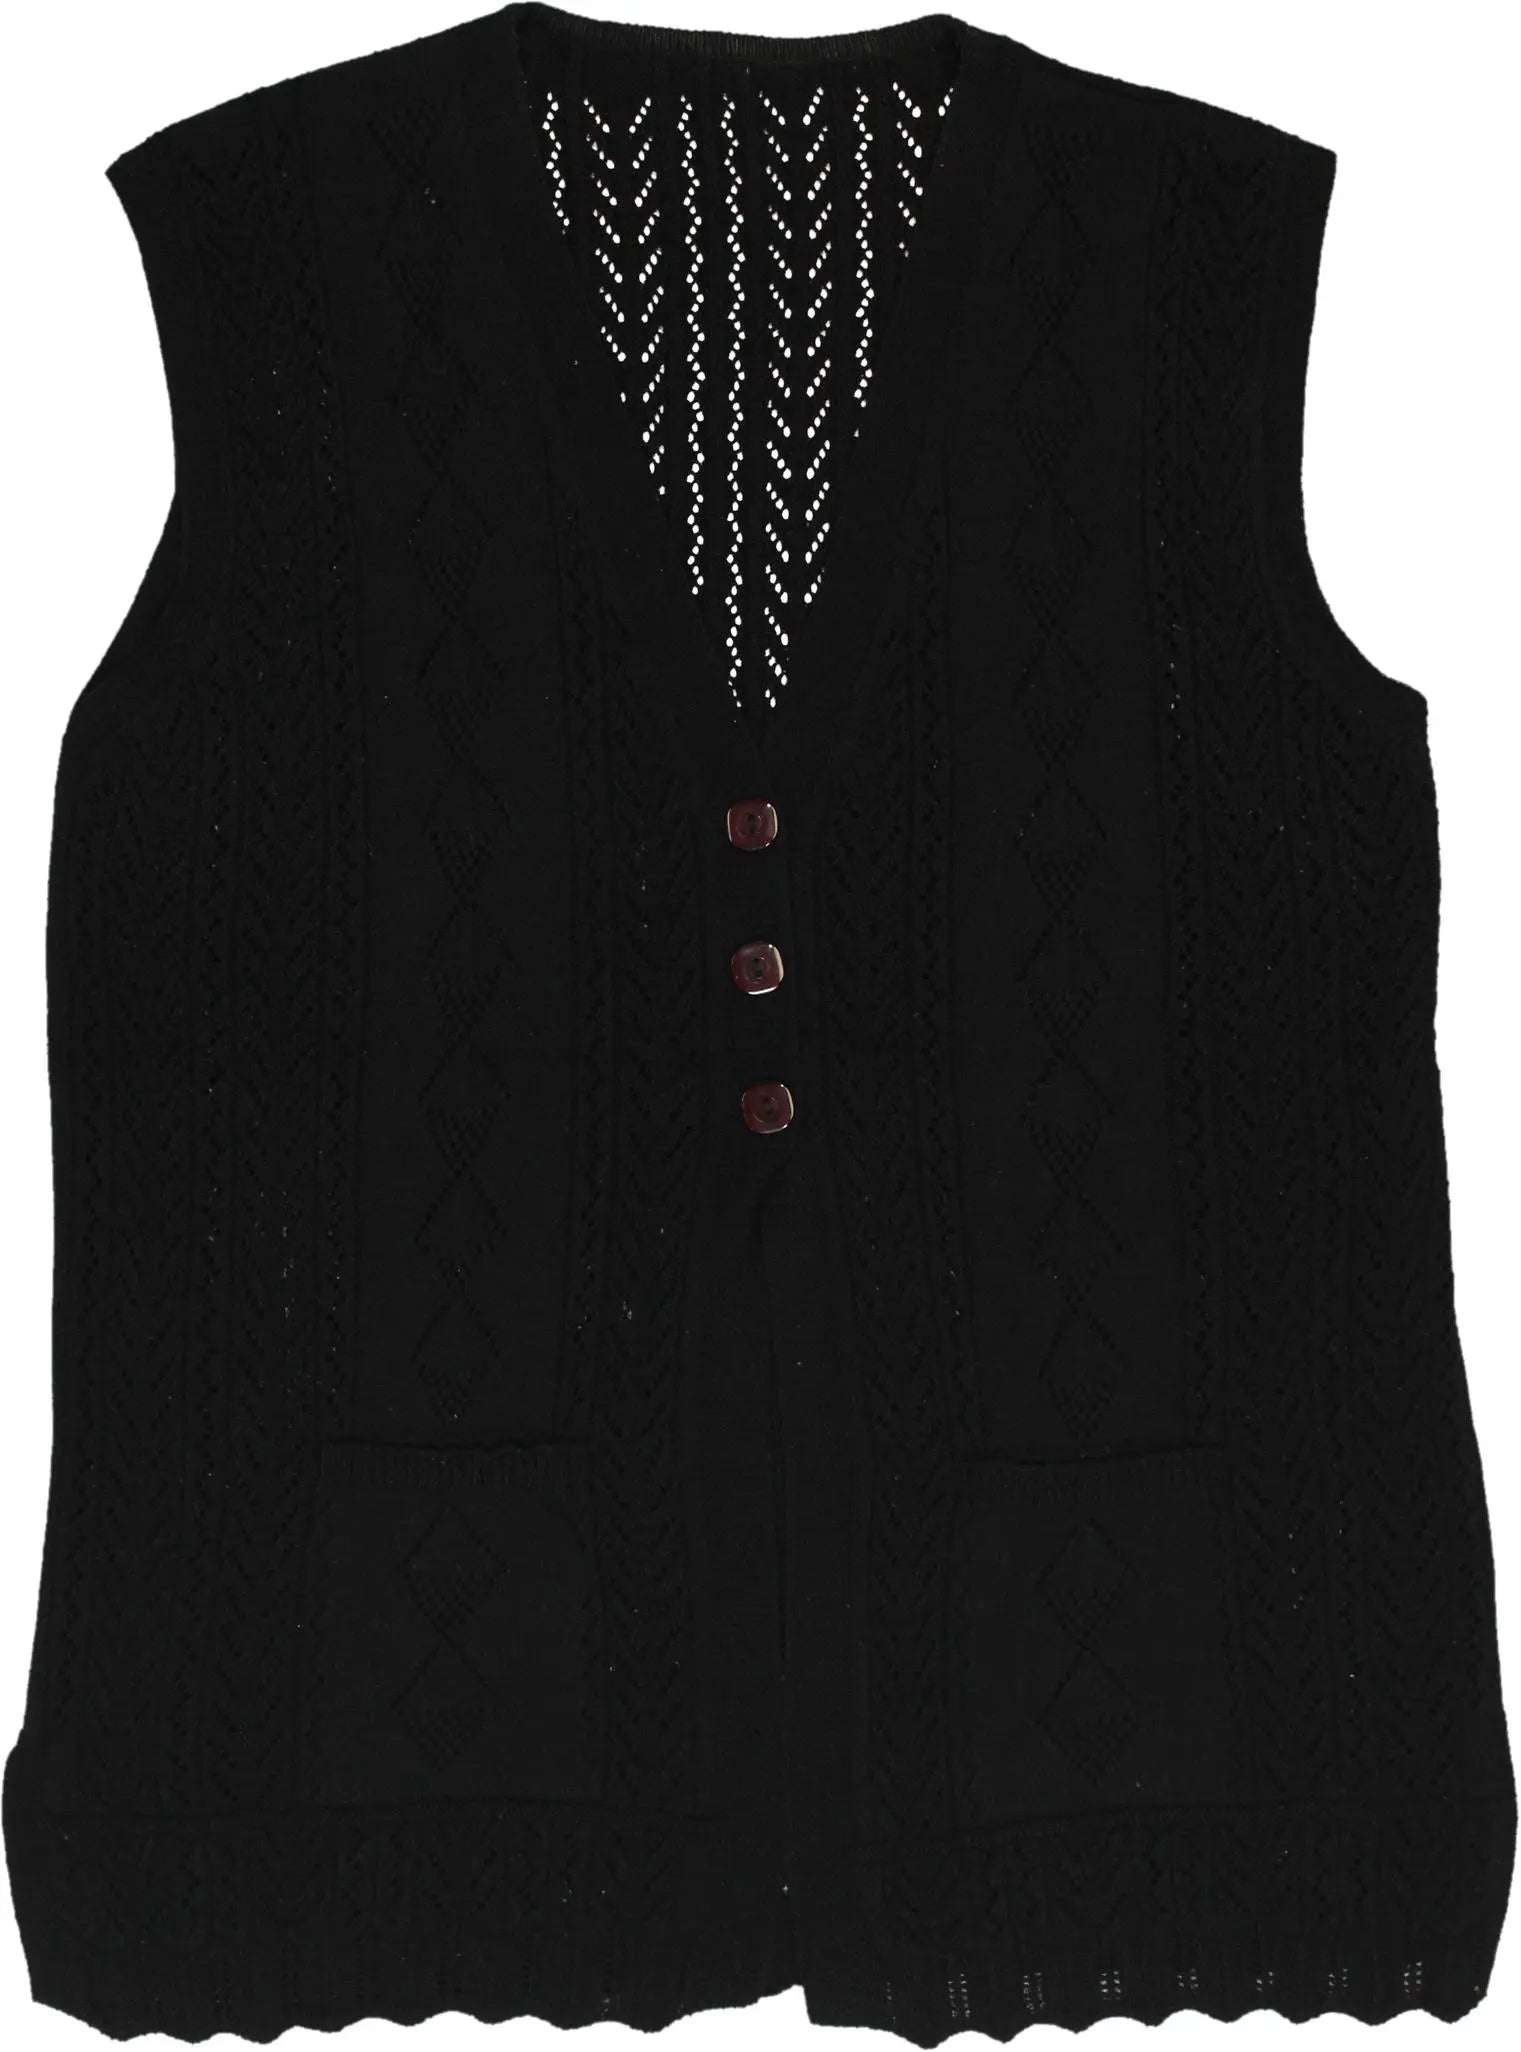 Unknown - Knitted Vest- ThriftTale.com - Vintage and second handclothing